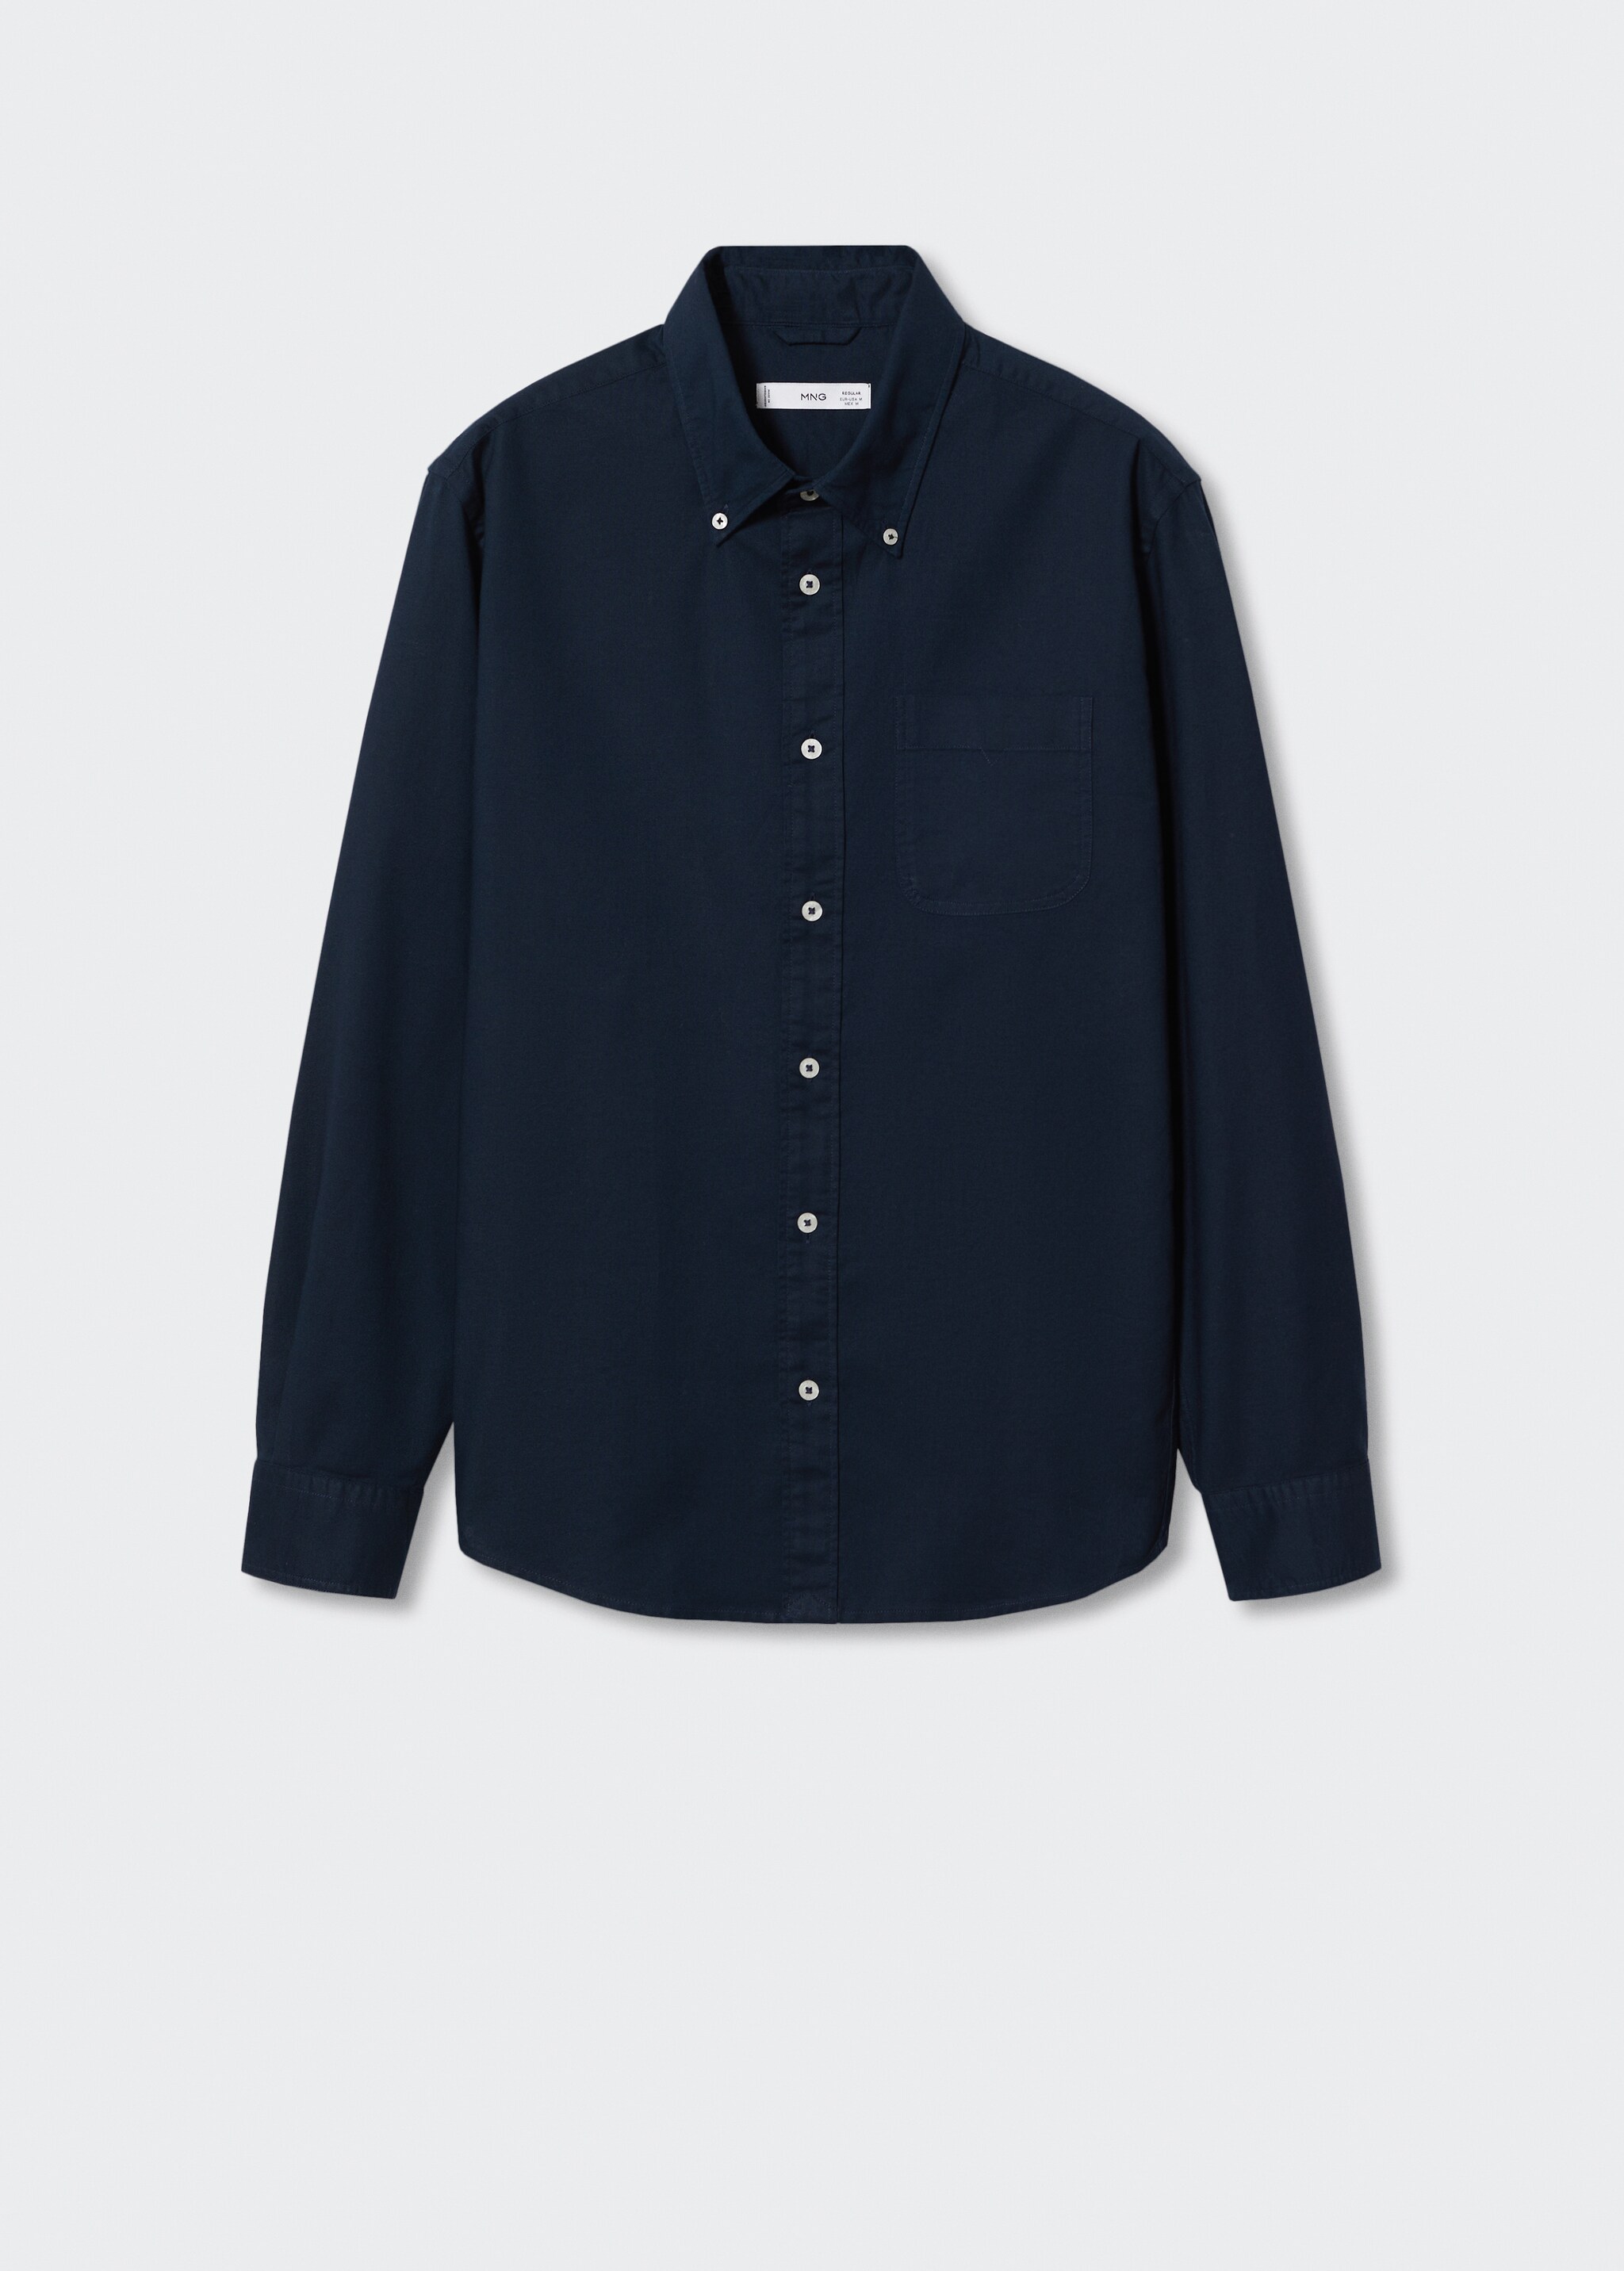 Regular fit Oxford cotton shirt - Article without model